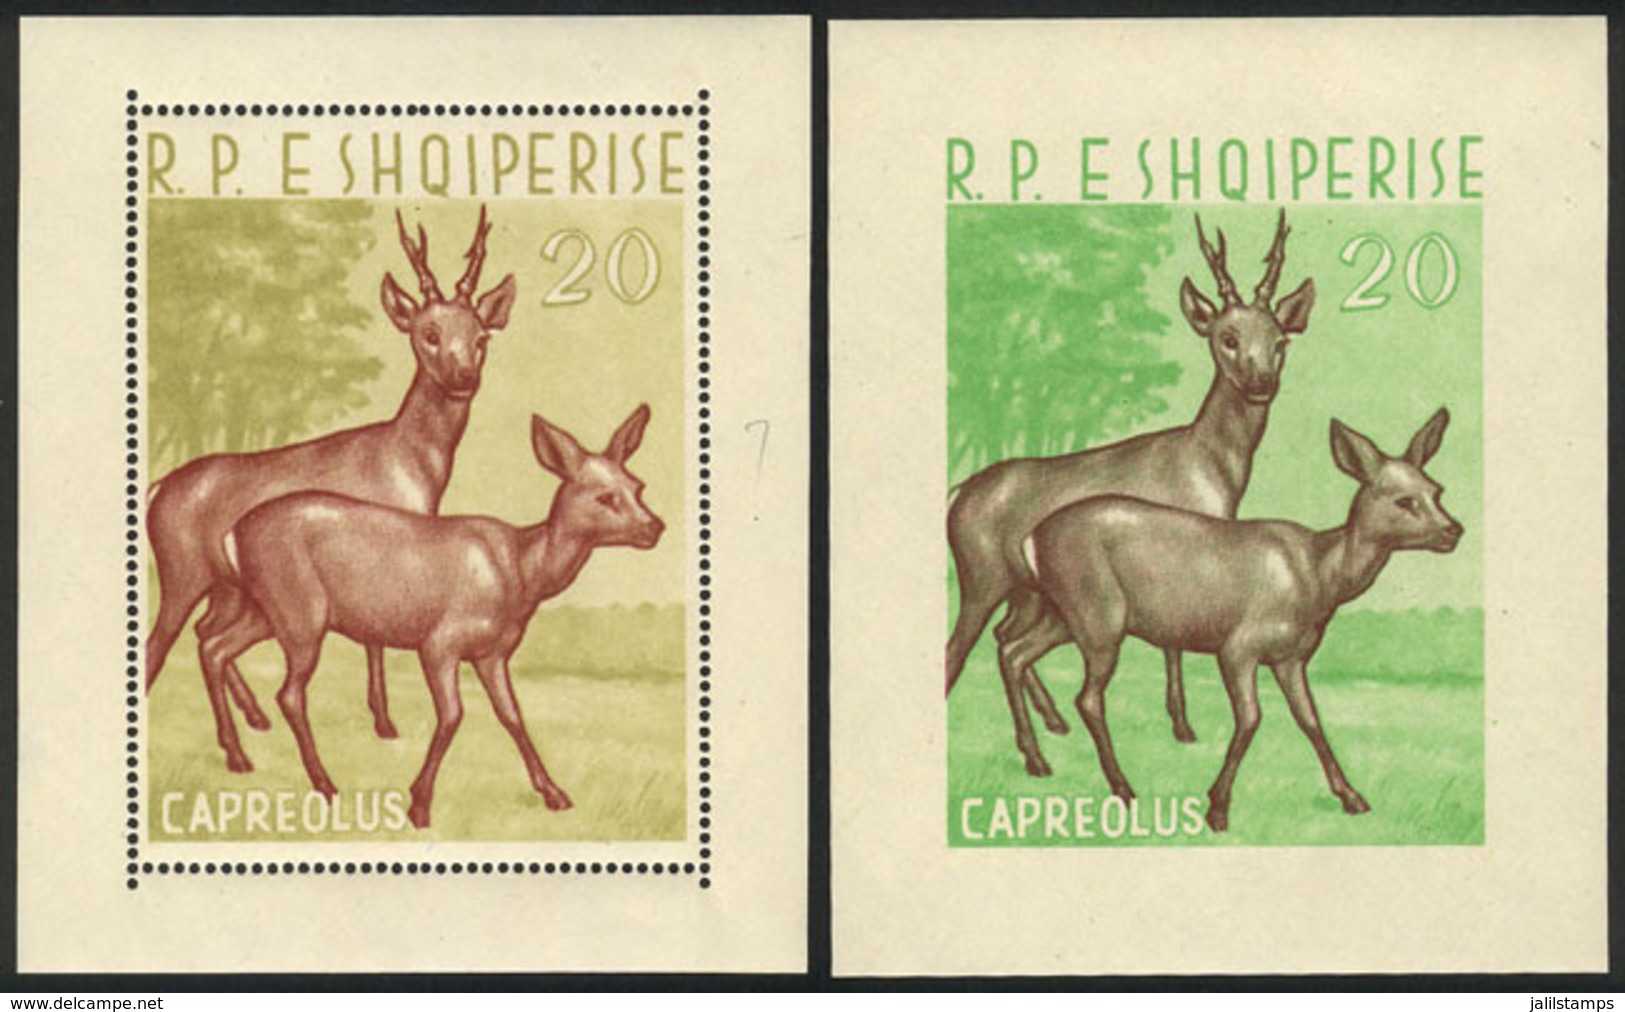 ALBANIA: Sc.643, 1962 20l. Deer, Perforated And Imperforate Sheets, MNH, Excellent Quality, Catalog Value US$260 - Albanie